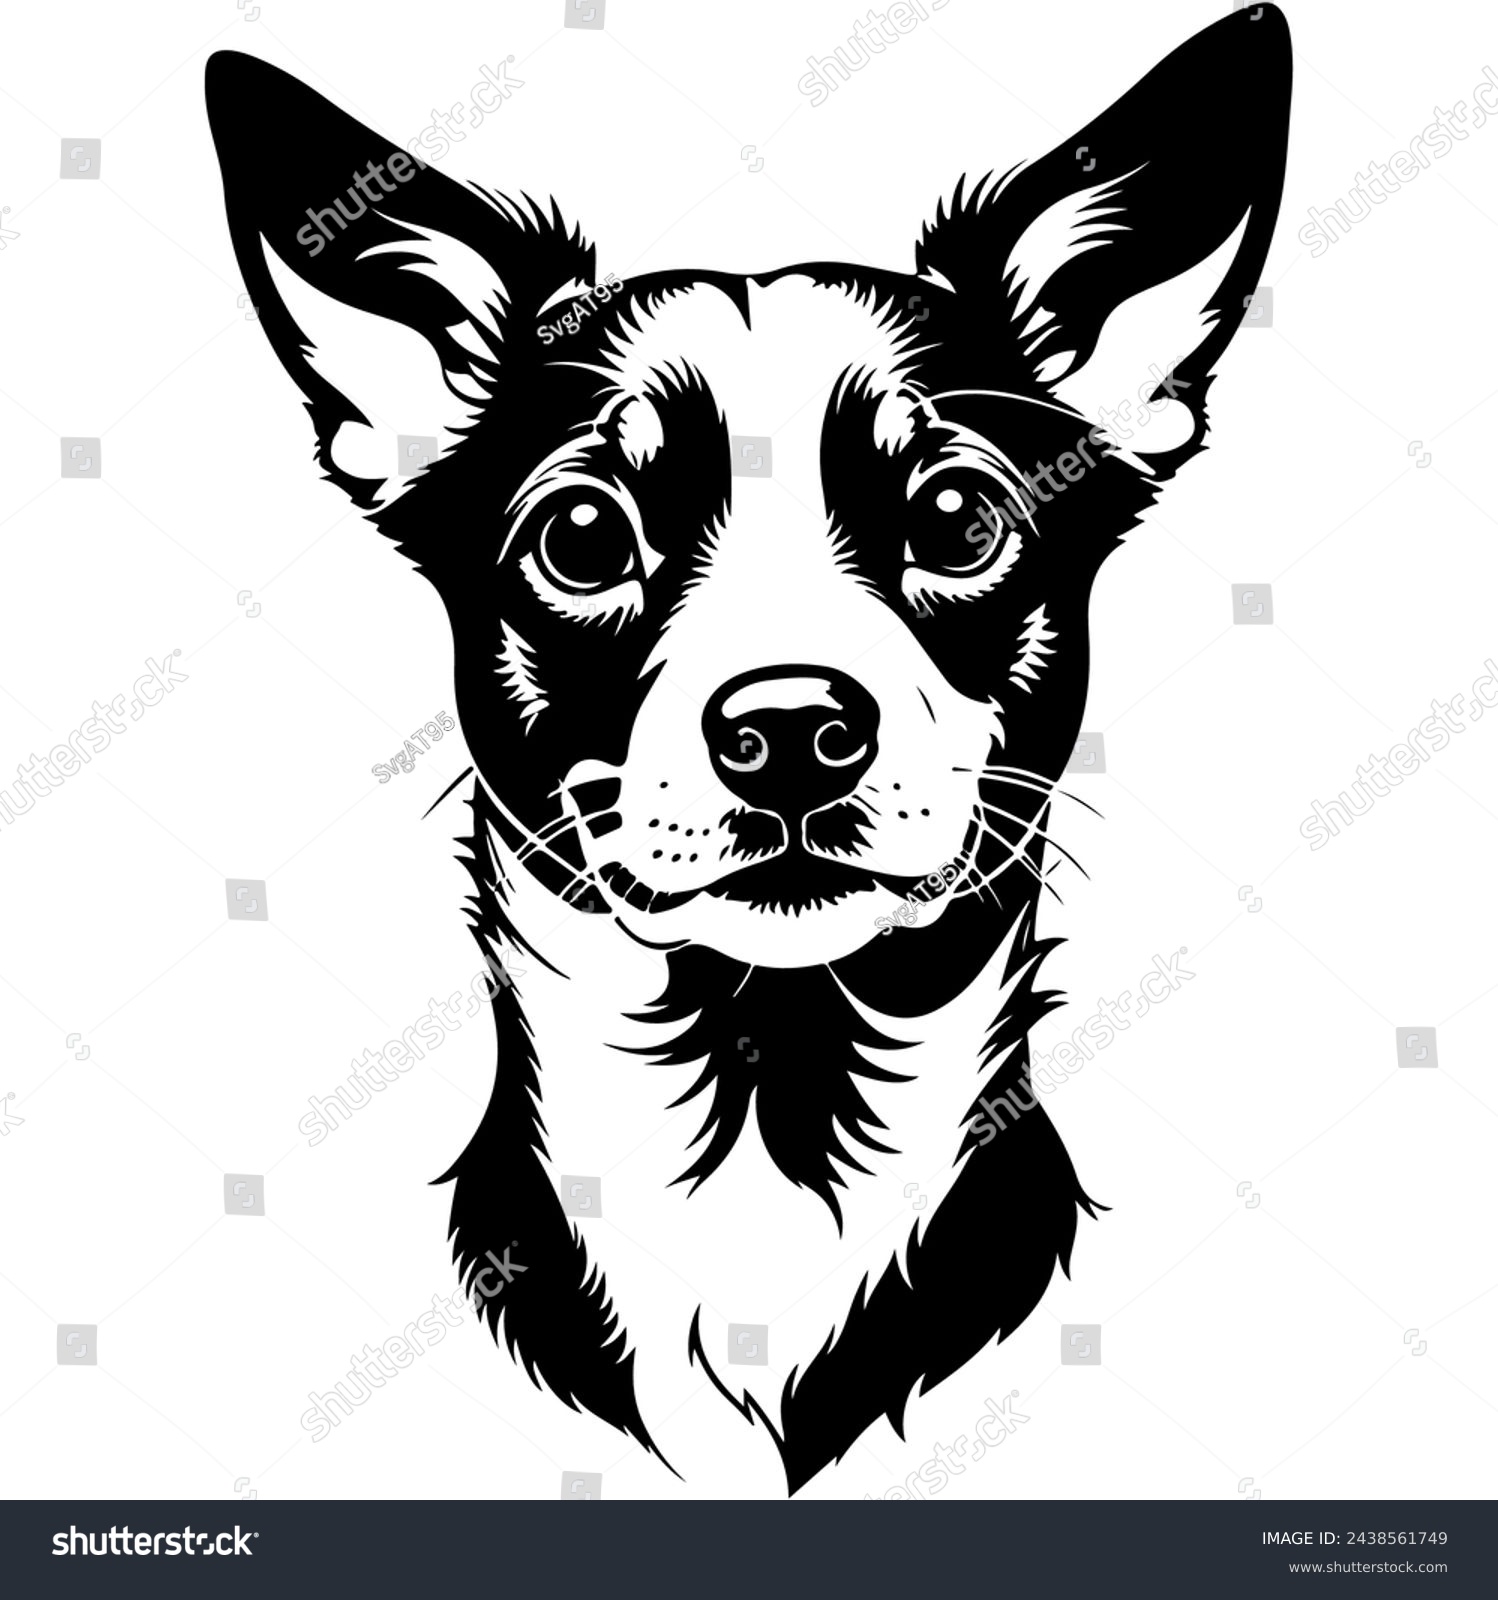 SVG of Portrait of a Jack Russell Dog Vector isolated on white background, Dog Silhouettes. svg